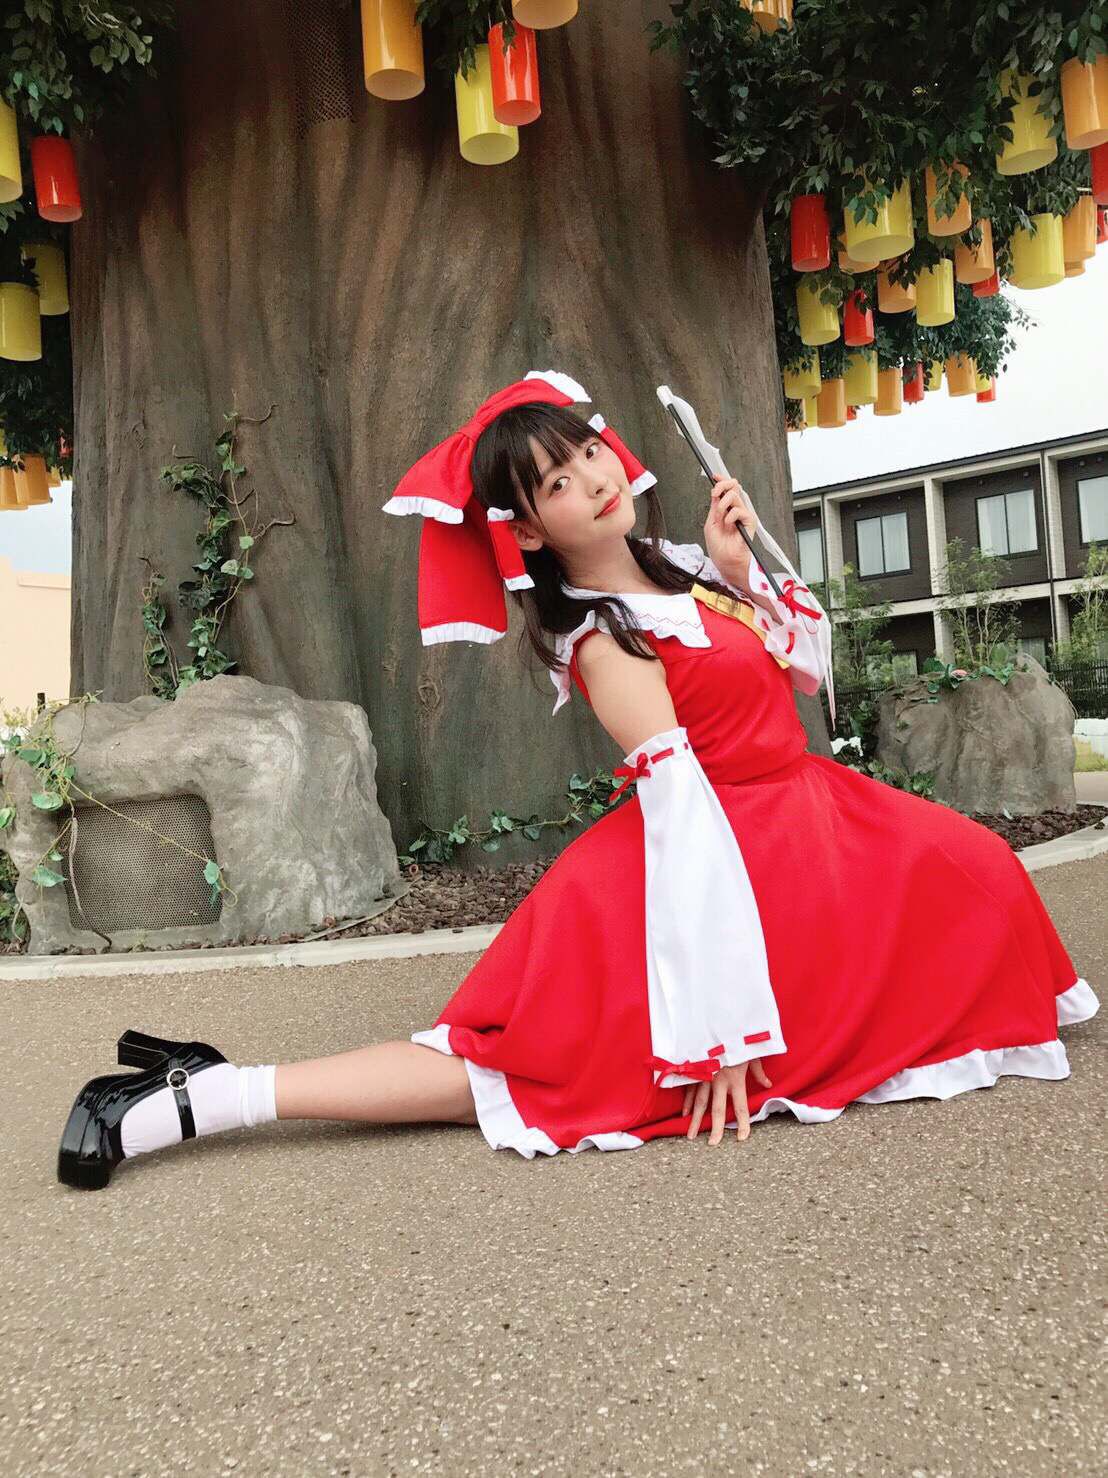 [Image] Sumire Kousaka's voice actor, discouraged erotic Reimu cosplay appearance without wwwww 3